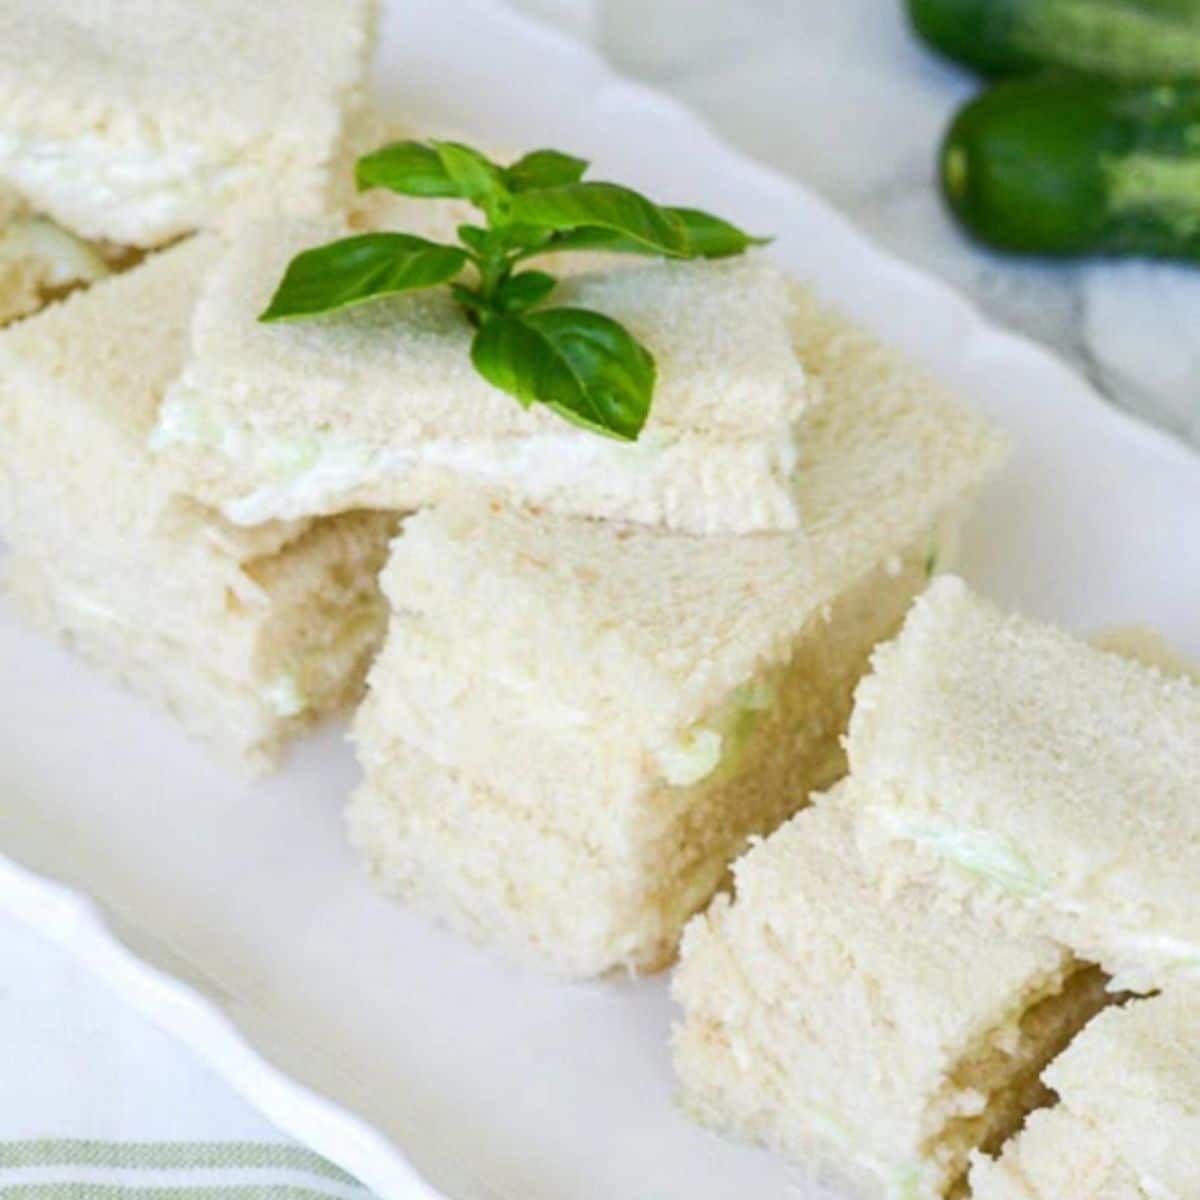 Cucumber sandwich spreads on a white tray.